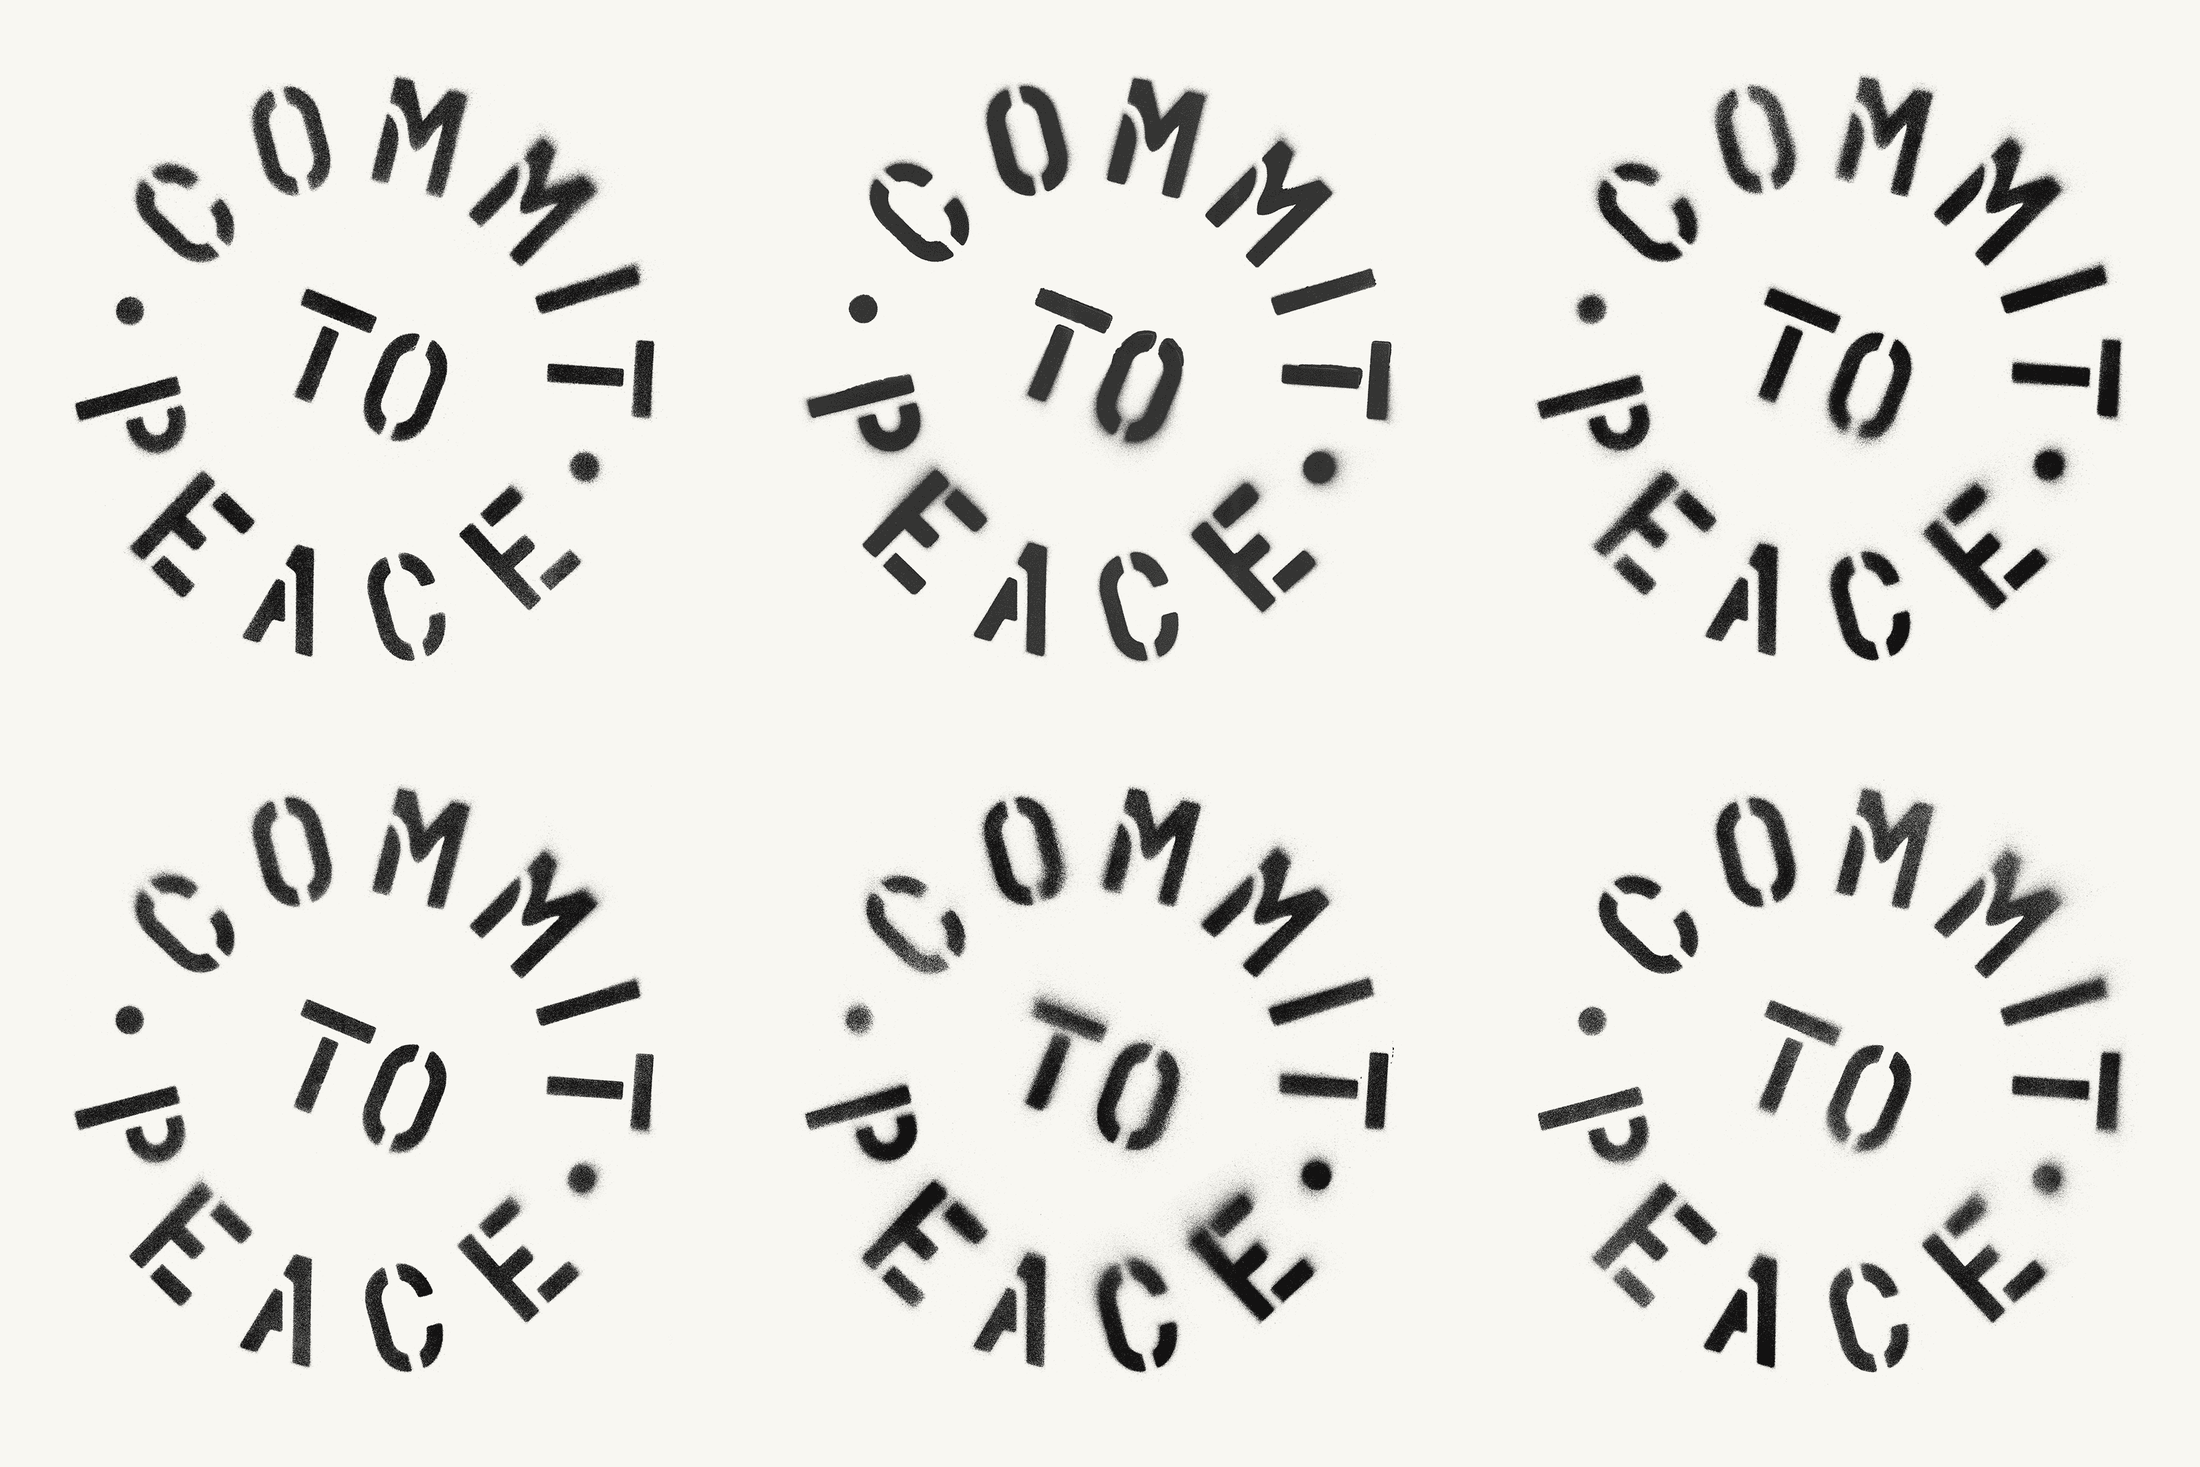 paul_belford_ltd_commit_to_peace_stencils_small3.png